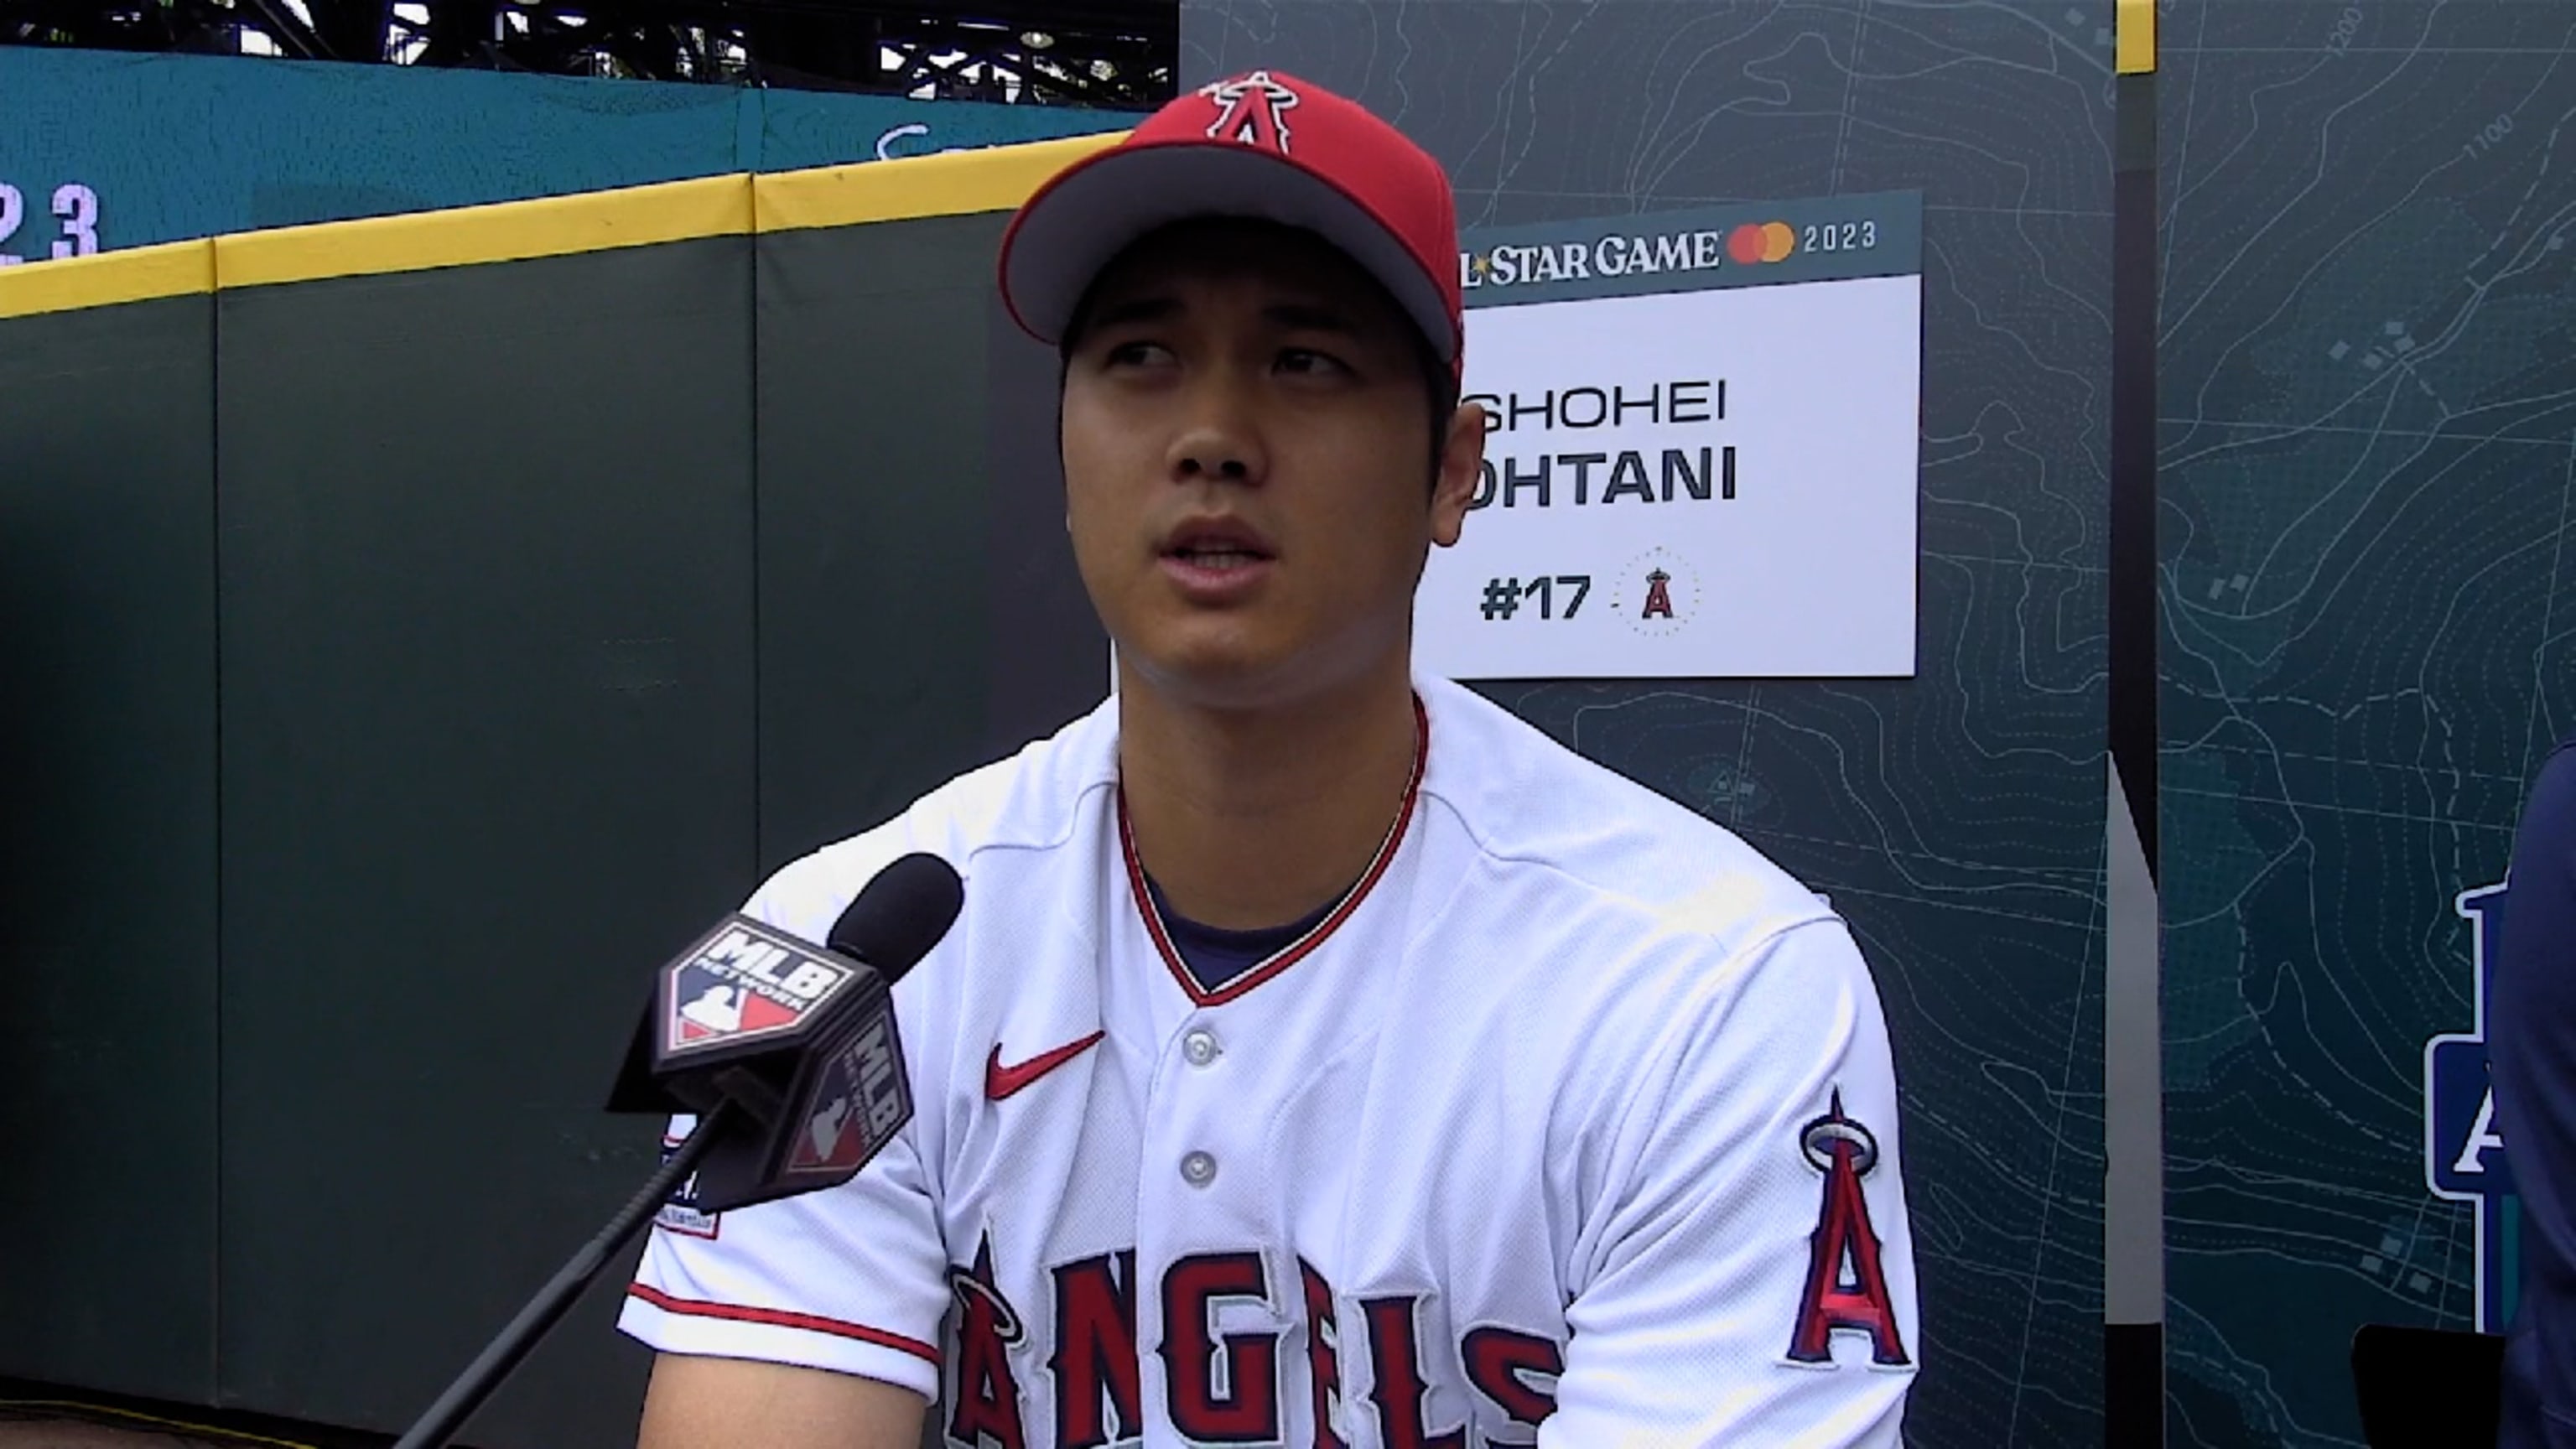 Mariners Ohtani jersey spotted at the All Star game. : r/Mariners